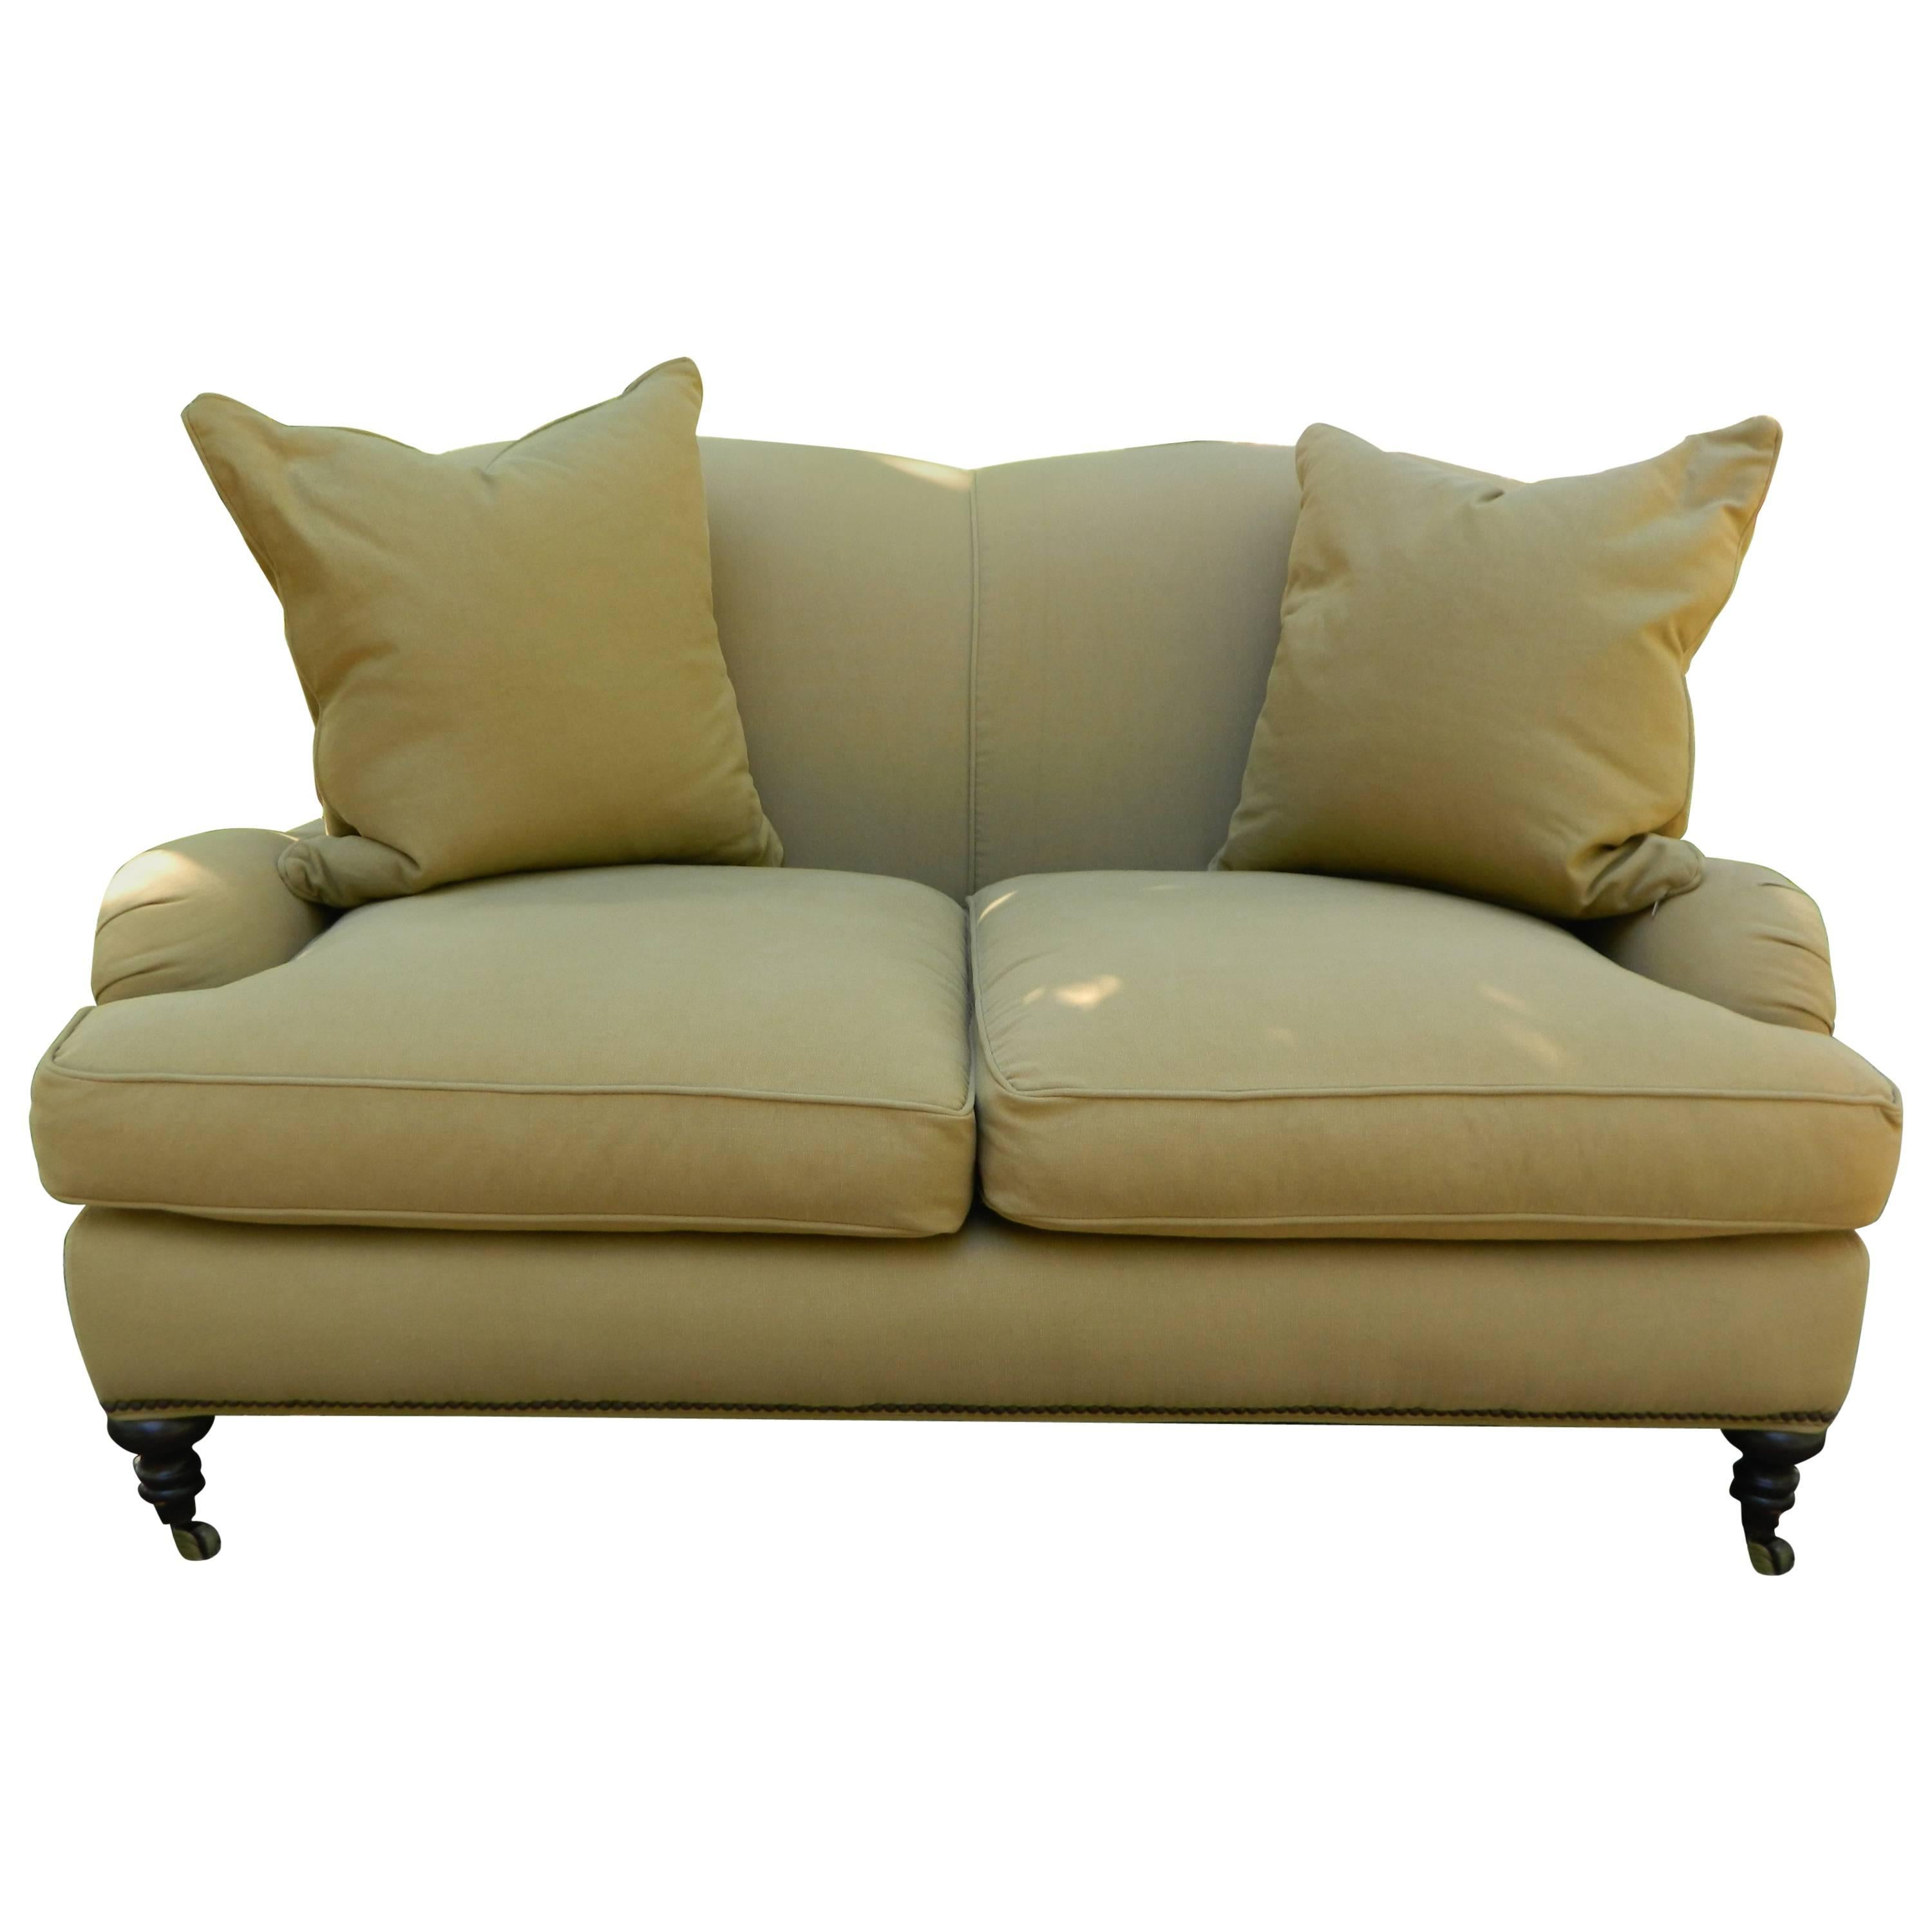 Upholstered Settee with Four Throw Pillows, 20th Century